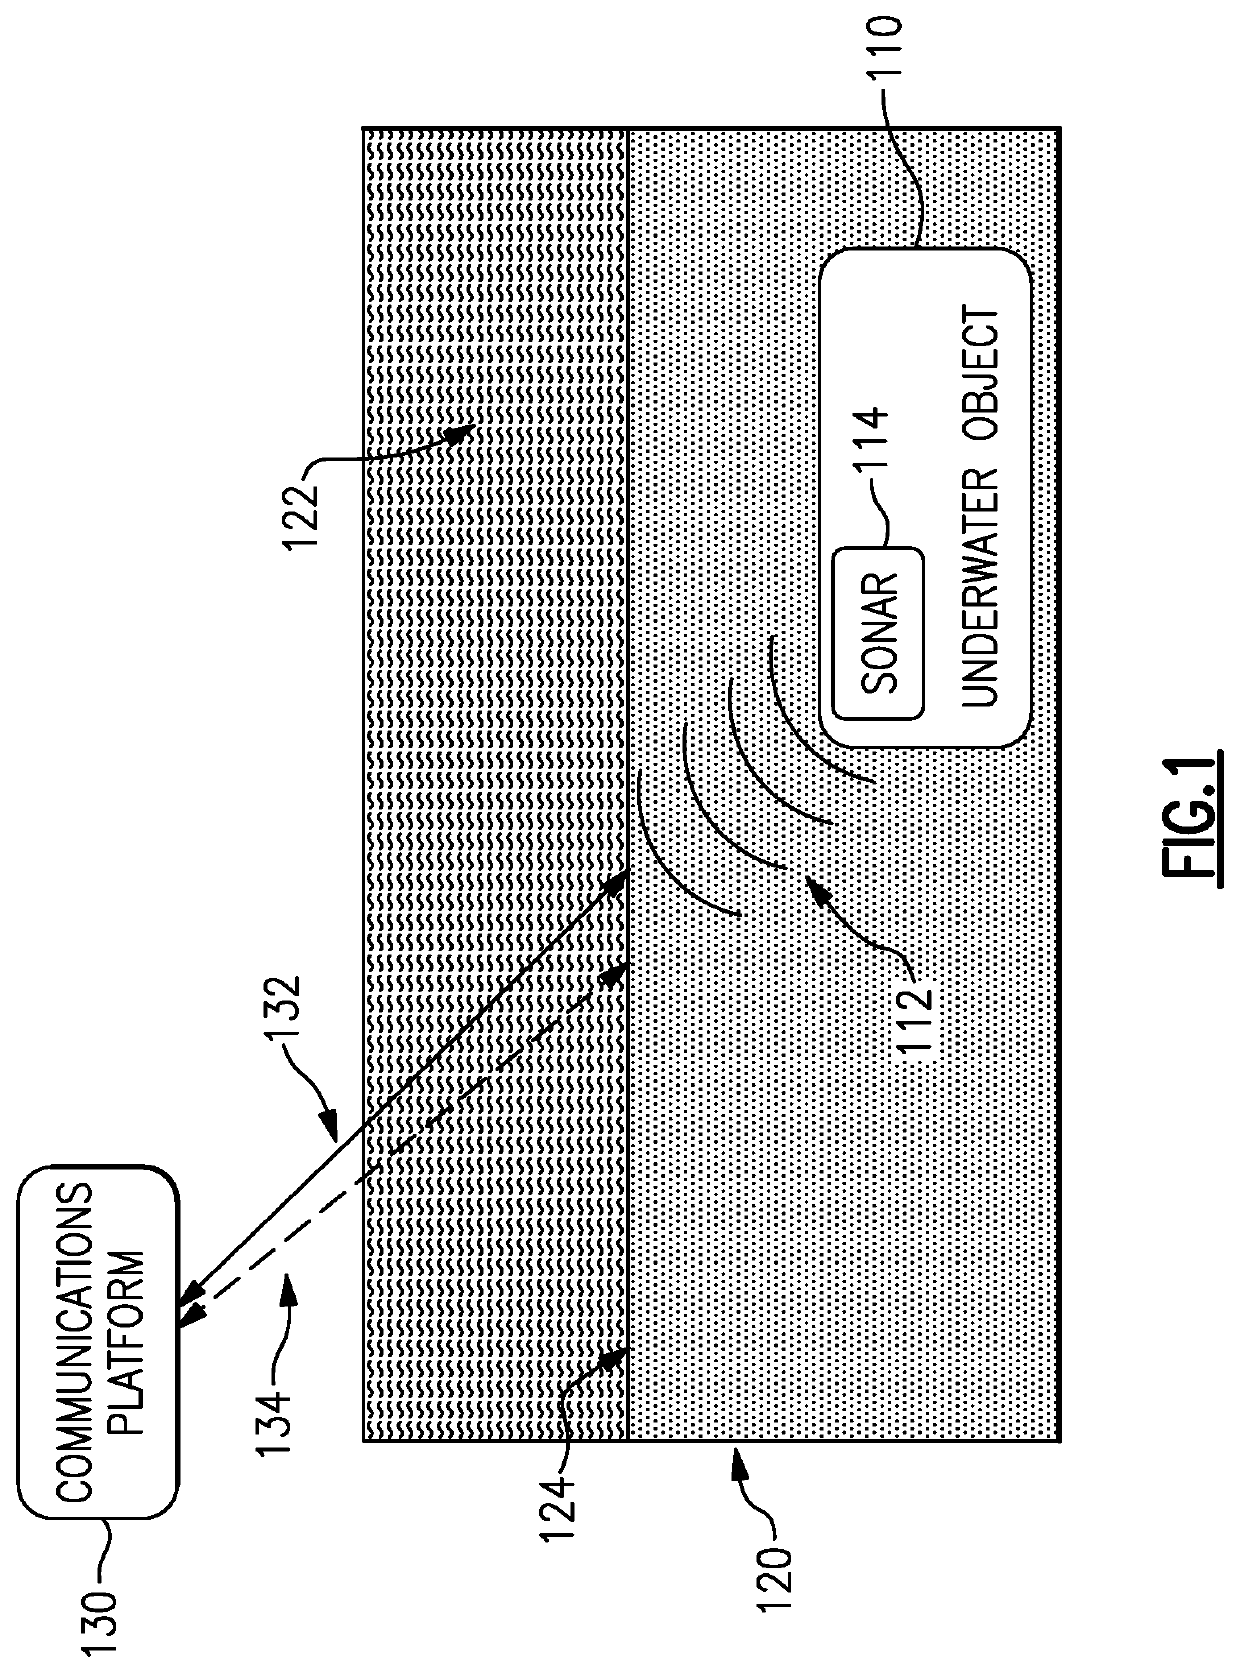 Acoustic to optical communications systems and methods